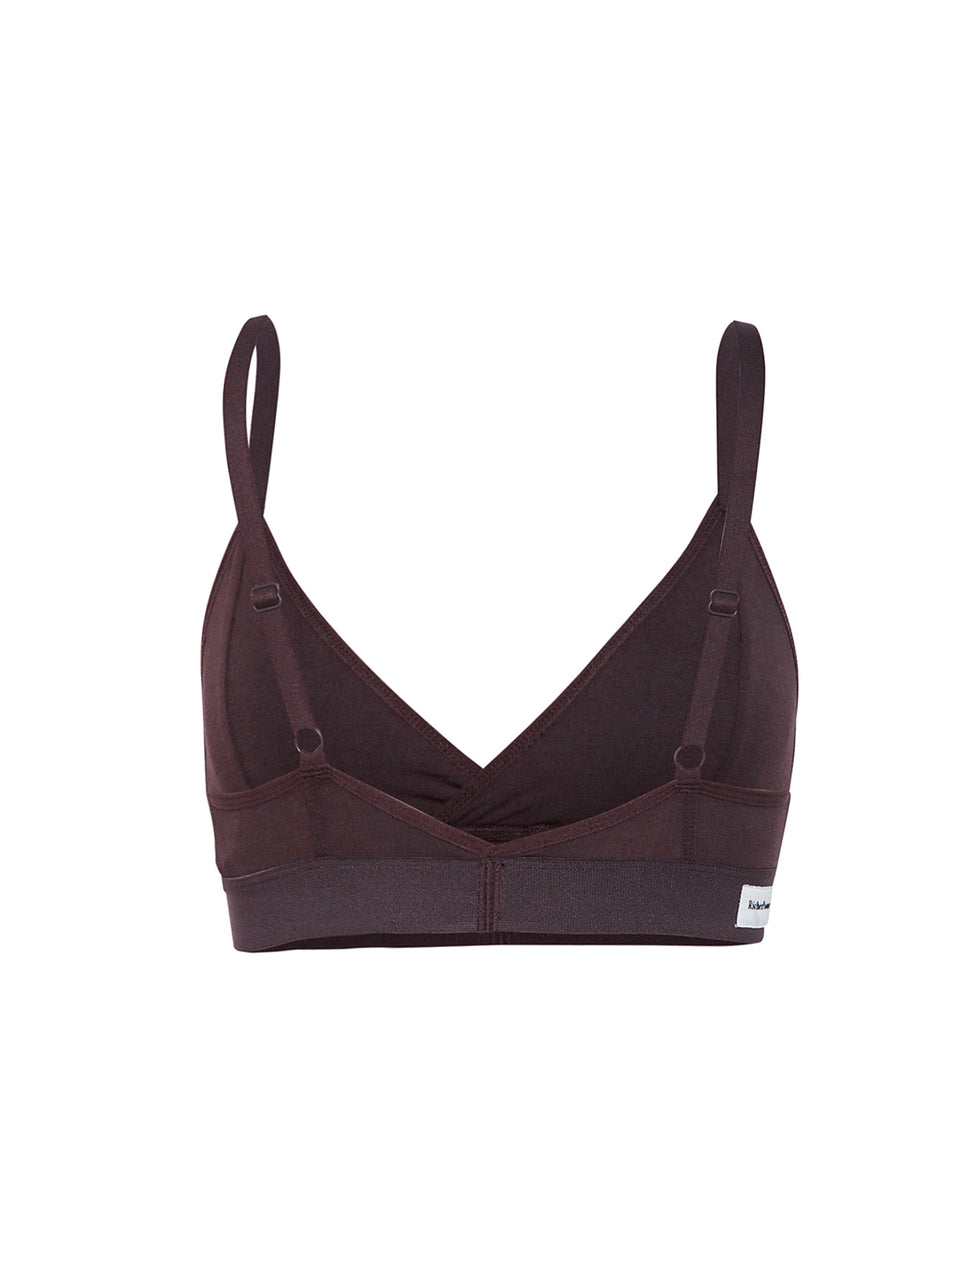 Richer Poorer Classic Bra Plum Smoke 01WIT-CLBR - Free Shipping at Largo  Drive